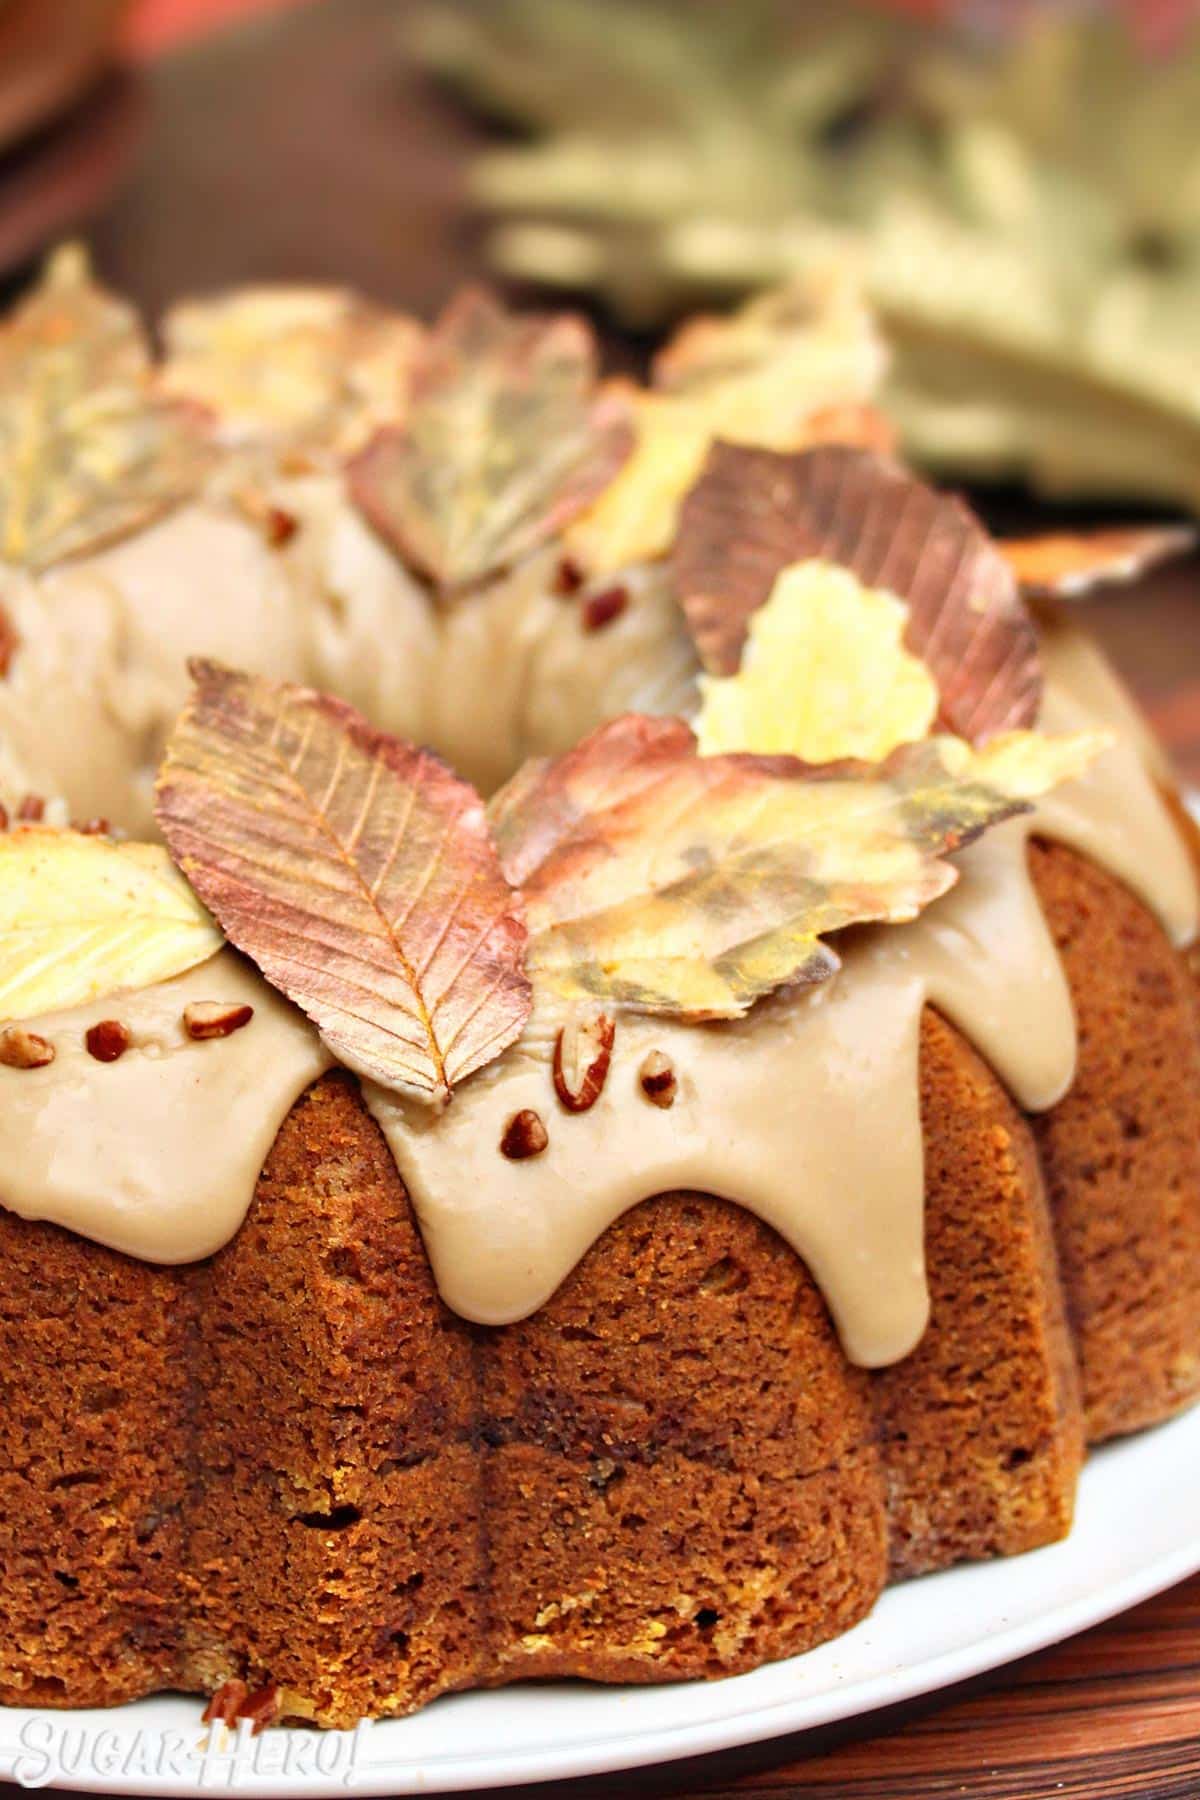 Golden chocolate leaves arranged around the edges of a bundt cake.